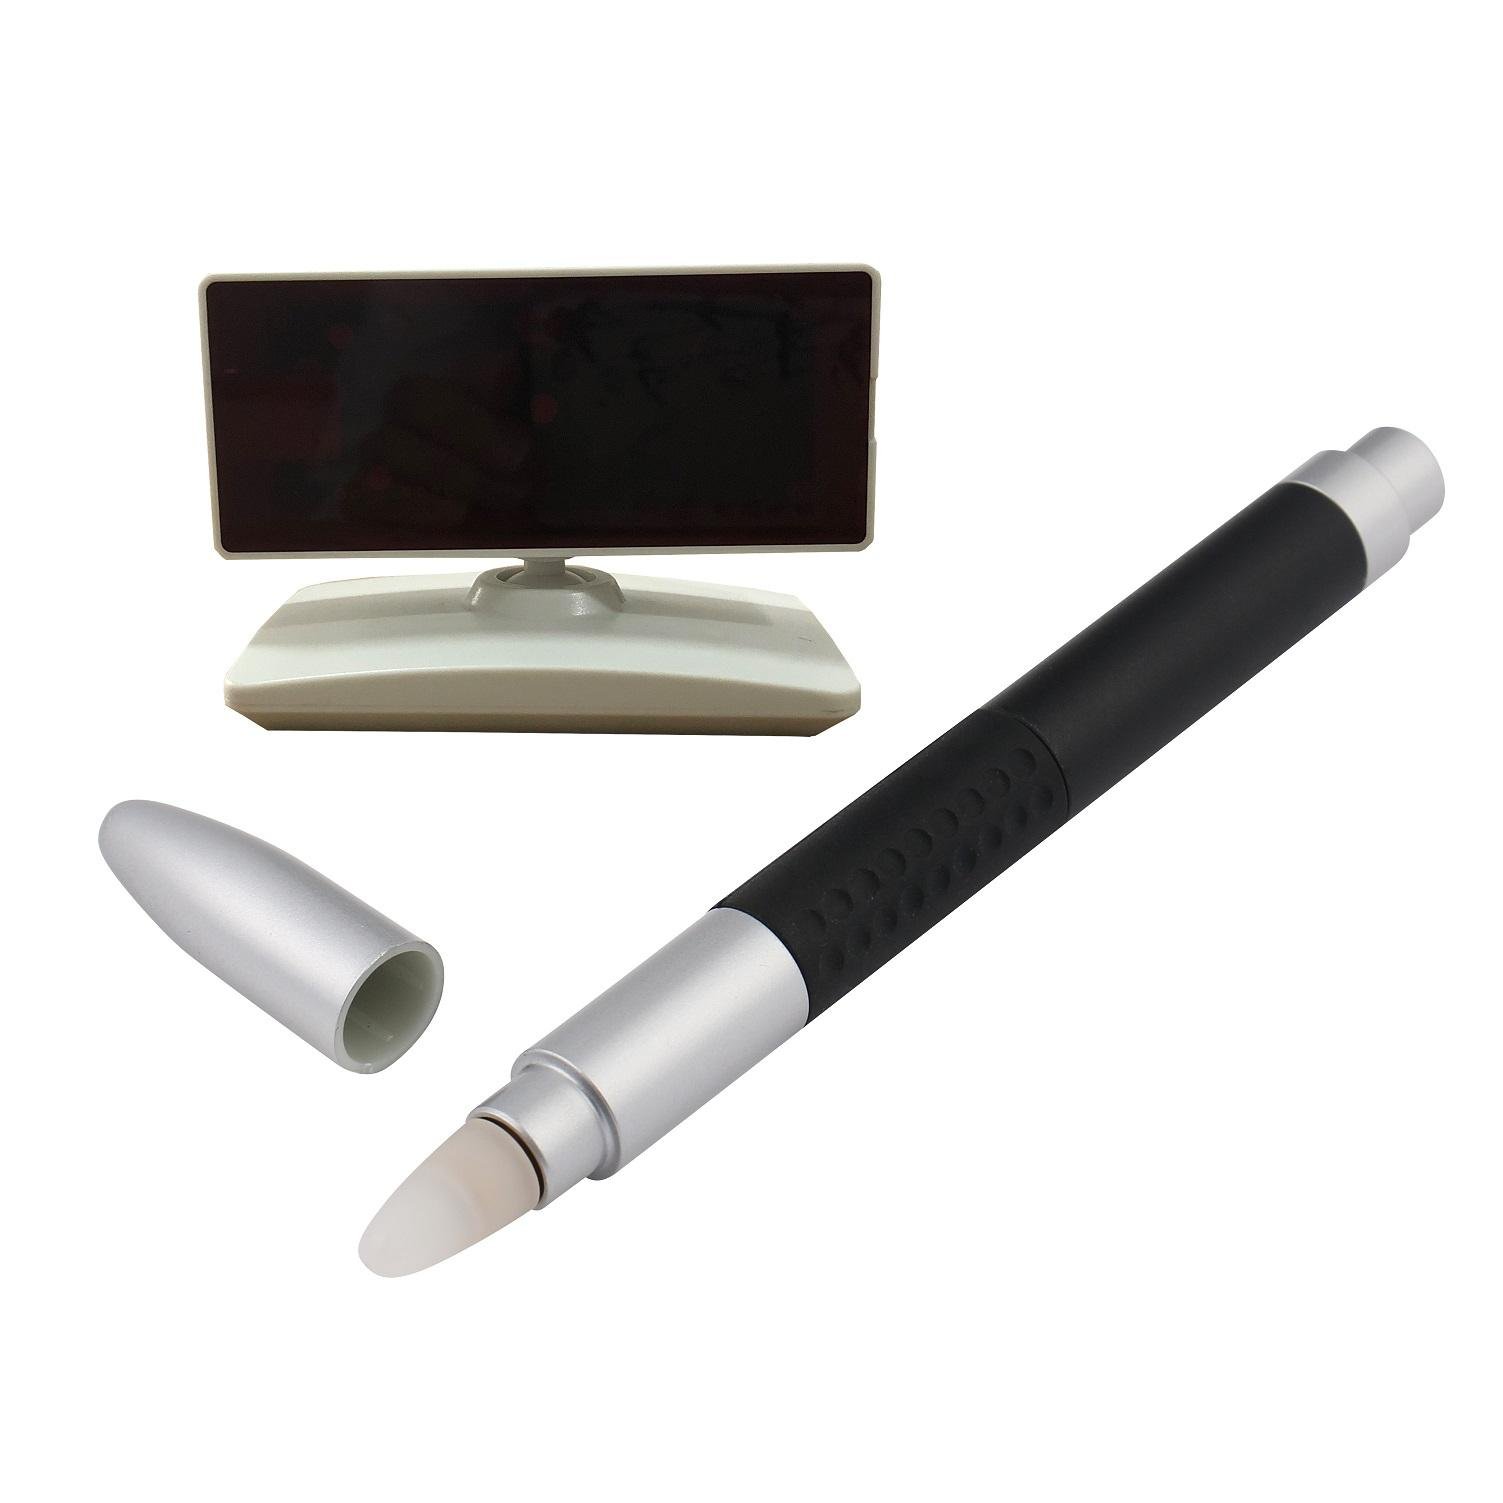  Pen touch Portable Smart Interactive Whiteboard for Classroom multi points